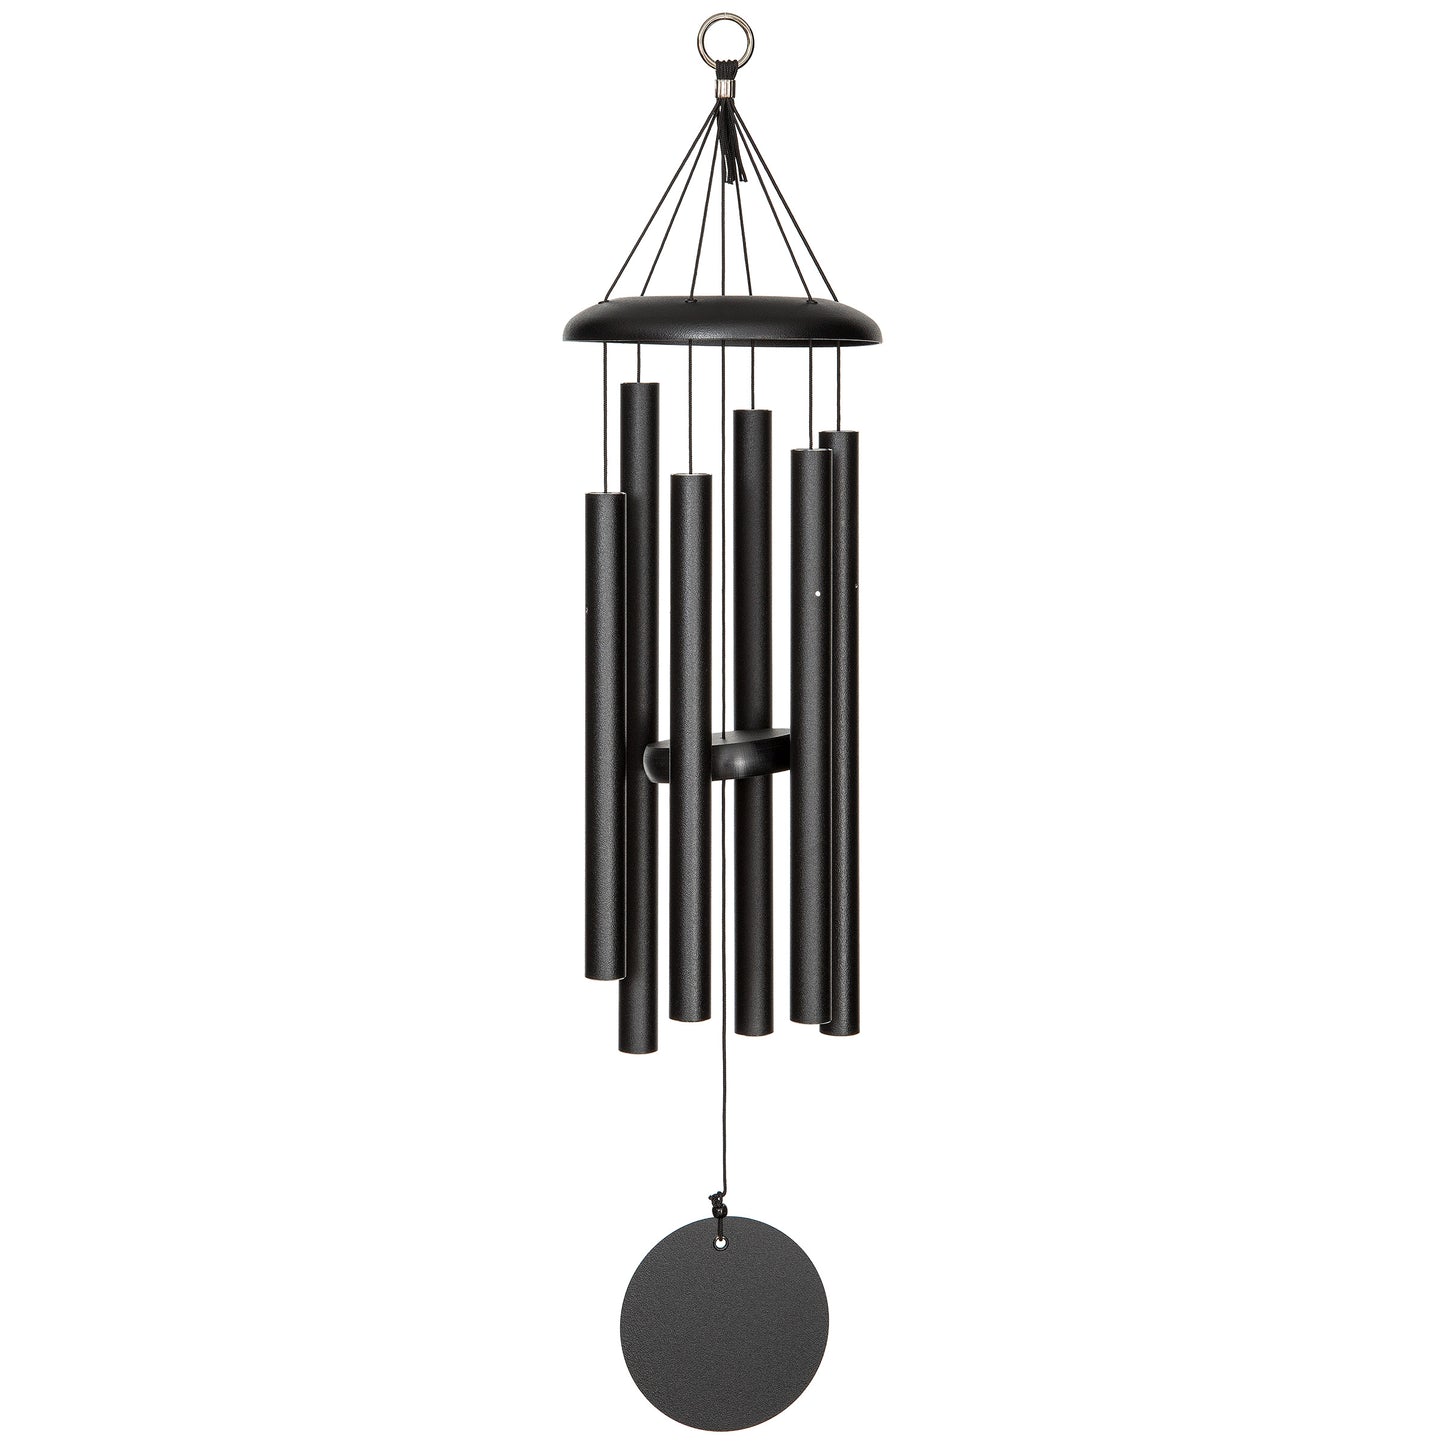 These Black Wind River Corinthian Bells wind chimes from Home and Garden Treasures are crafted with six hollow tubes of varying sizes suspended from a central ring, creating enchanting melodies as they dance in the breeze. Complete with a stylish round metal sail that catches gentle winds, each Corinthian Bell exemplifies timeless elegance and superior craftsmanship. Elevate your garden retreat with the perfect gift today!